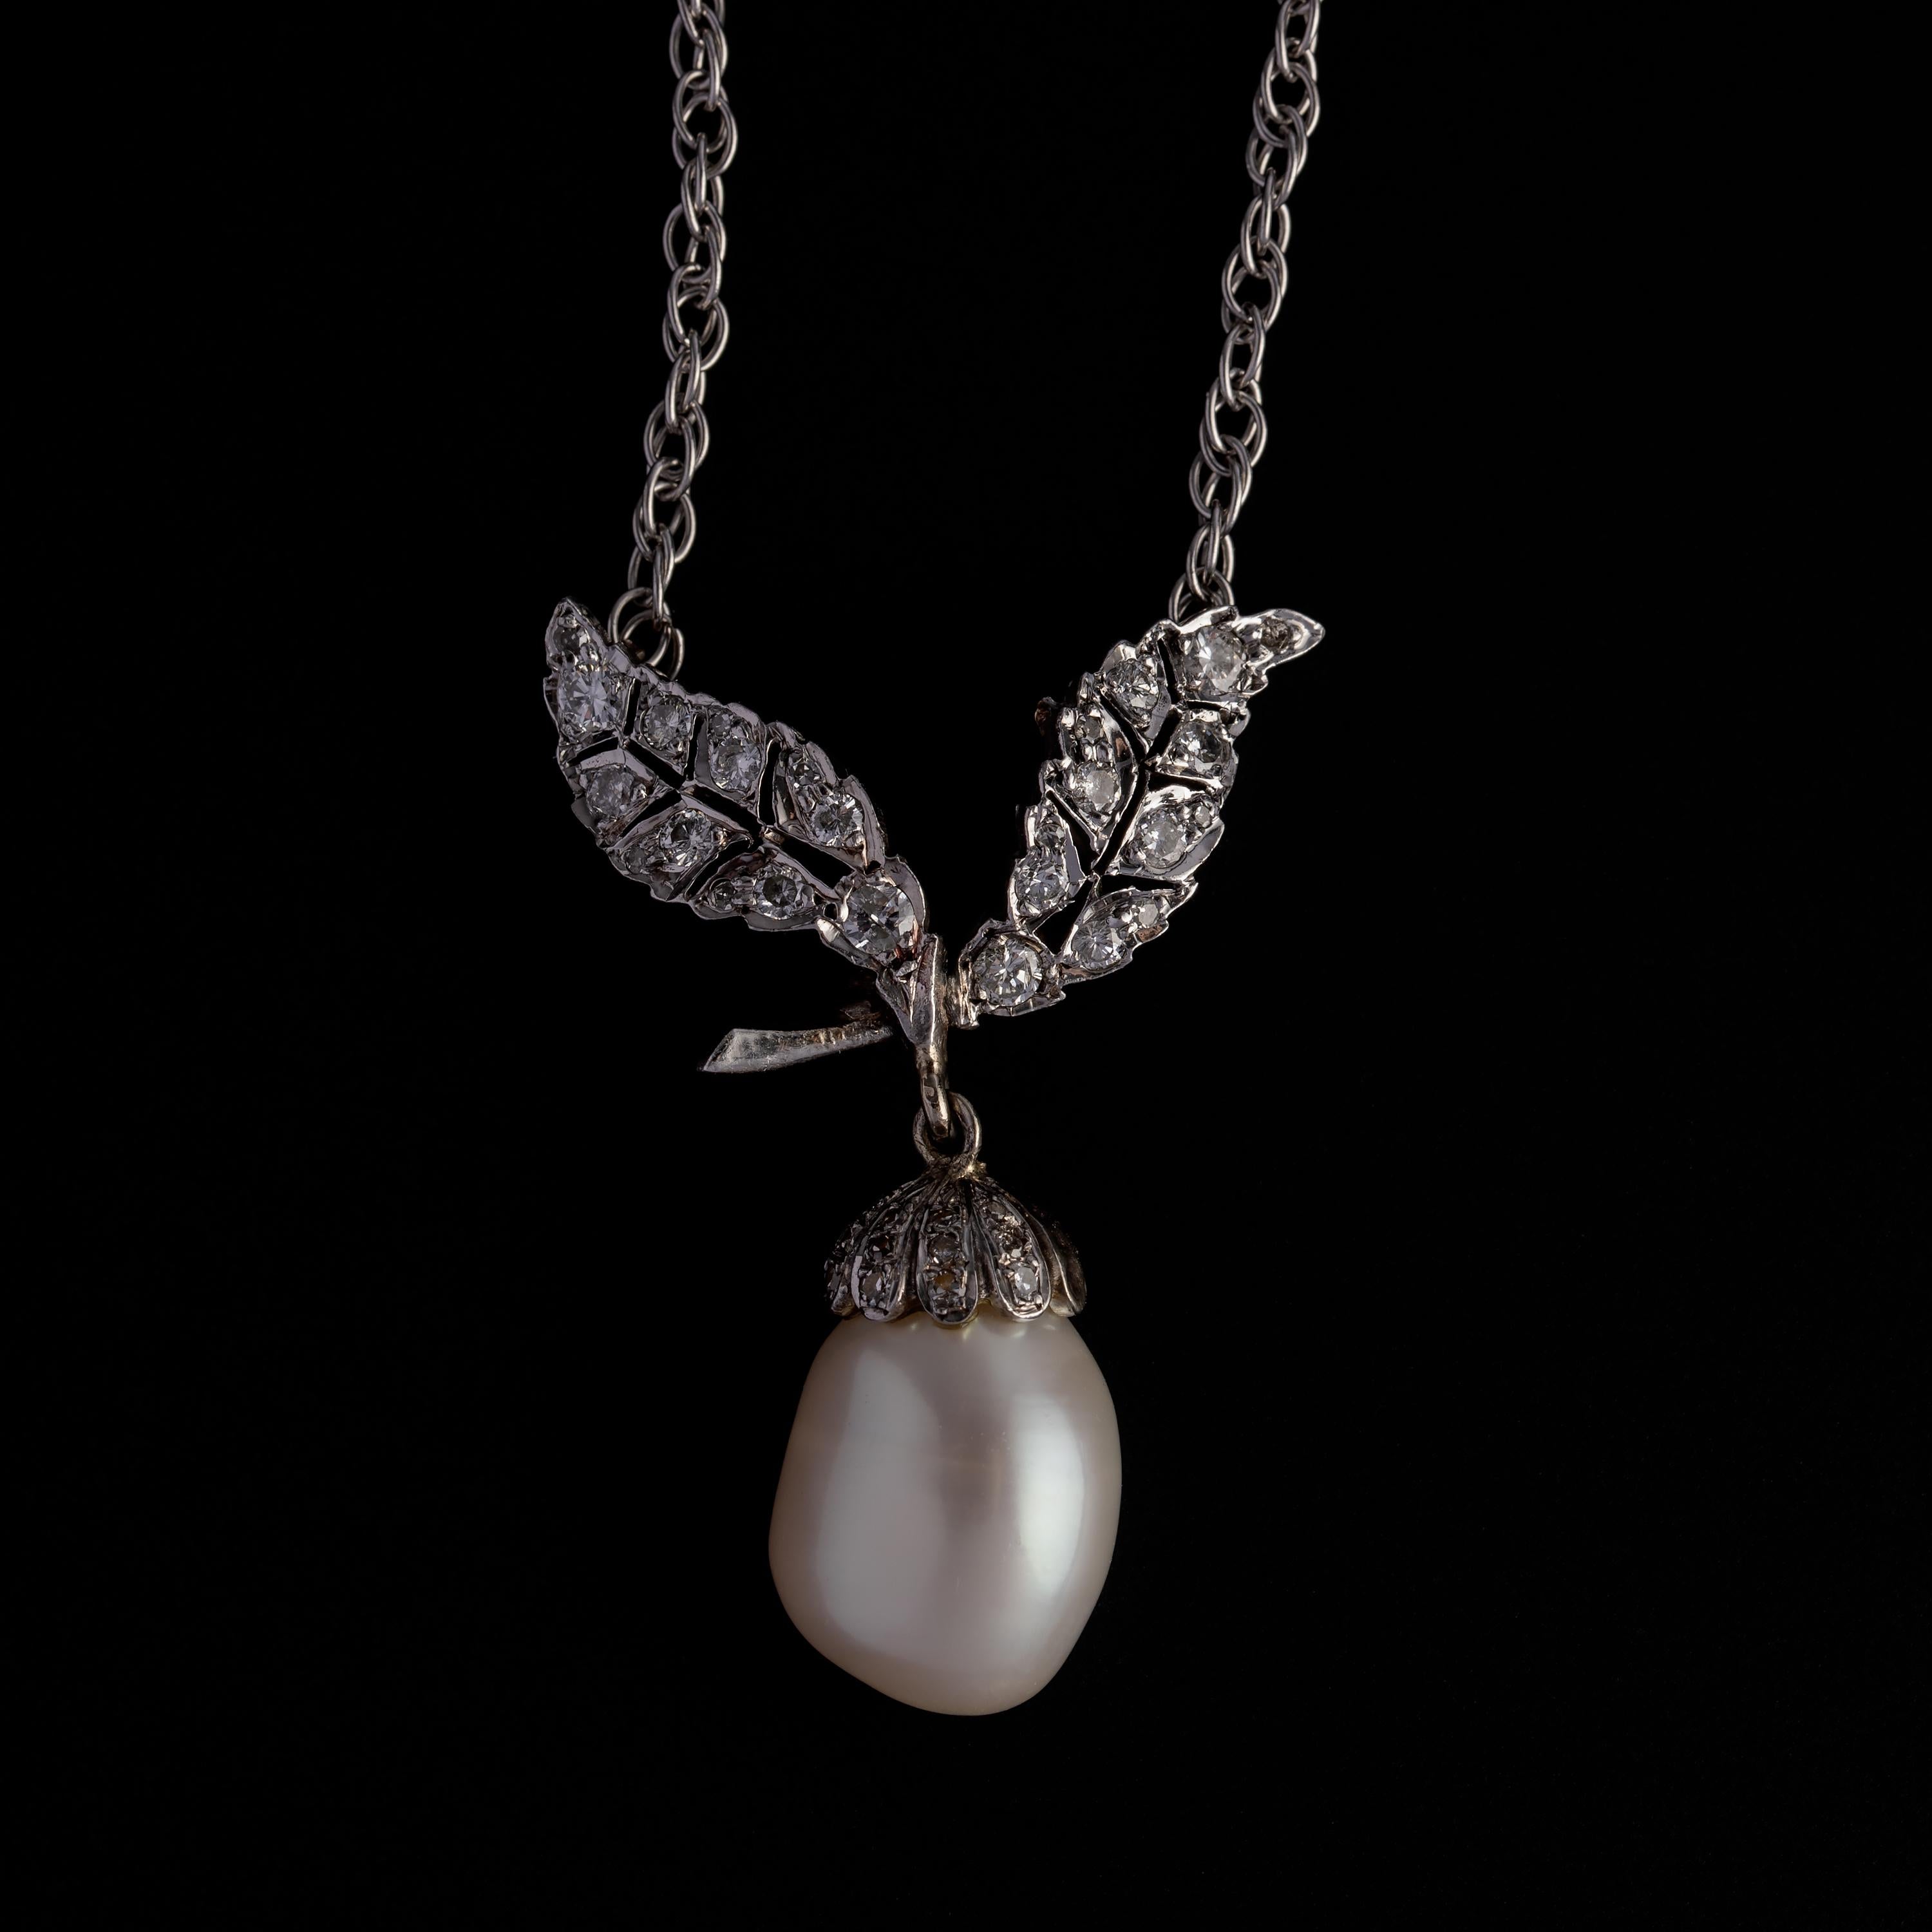 A huge (12.16mm x 9.26mm) GIA certified cultured freshwater semi-baroque pearl dangles freely from a pair of silvery, diamond-set leaves in this Victorian-revival pendant. This chic circa-1960s necklace measures 23